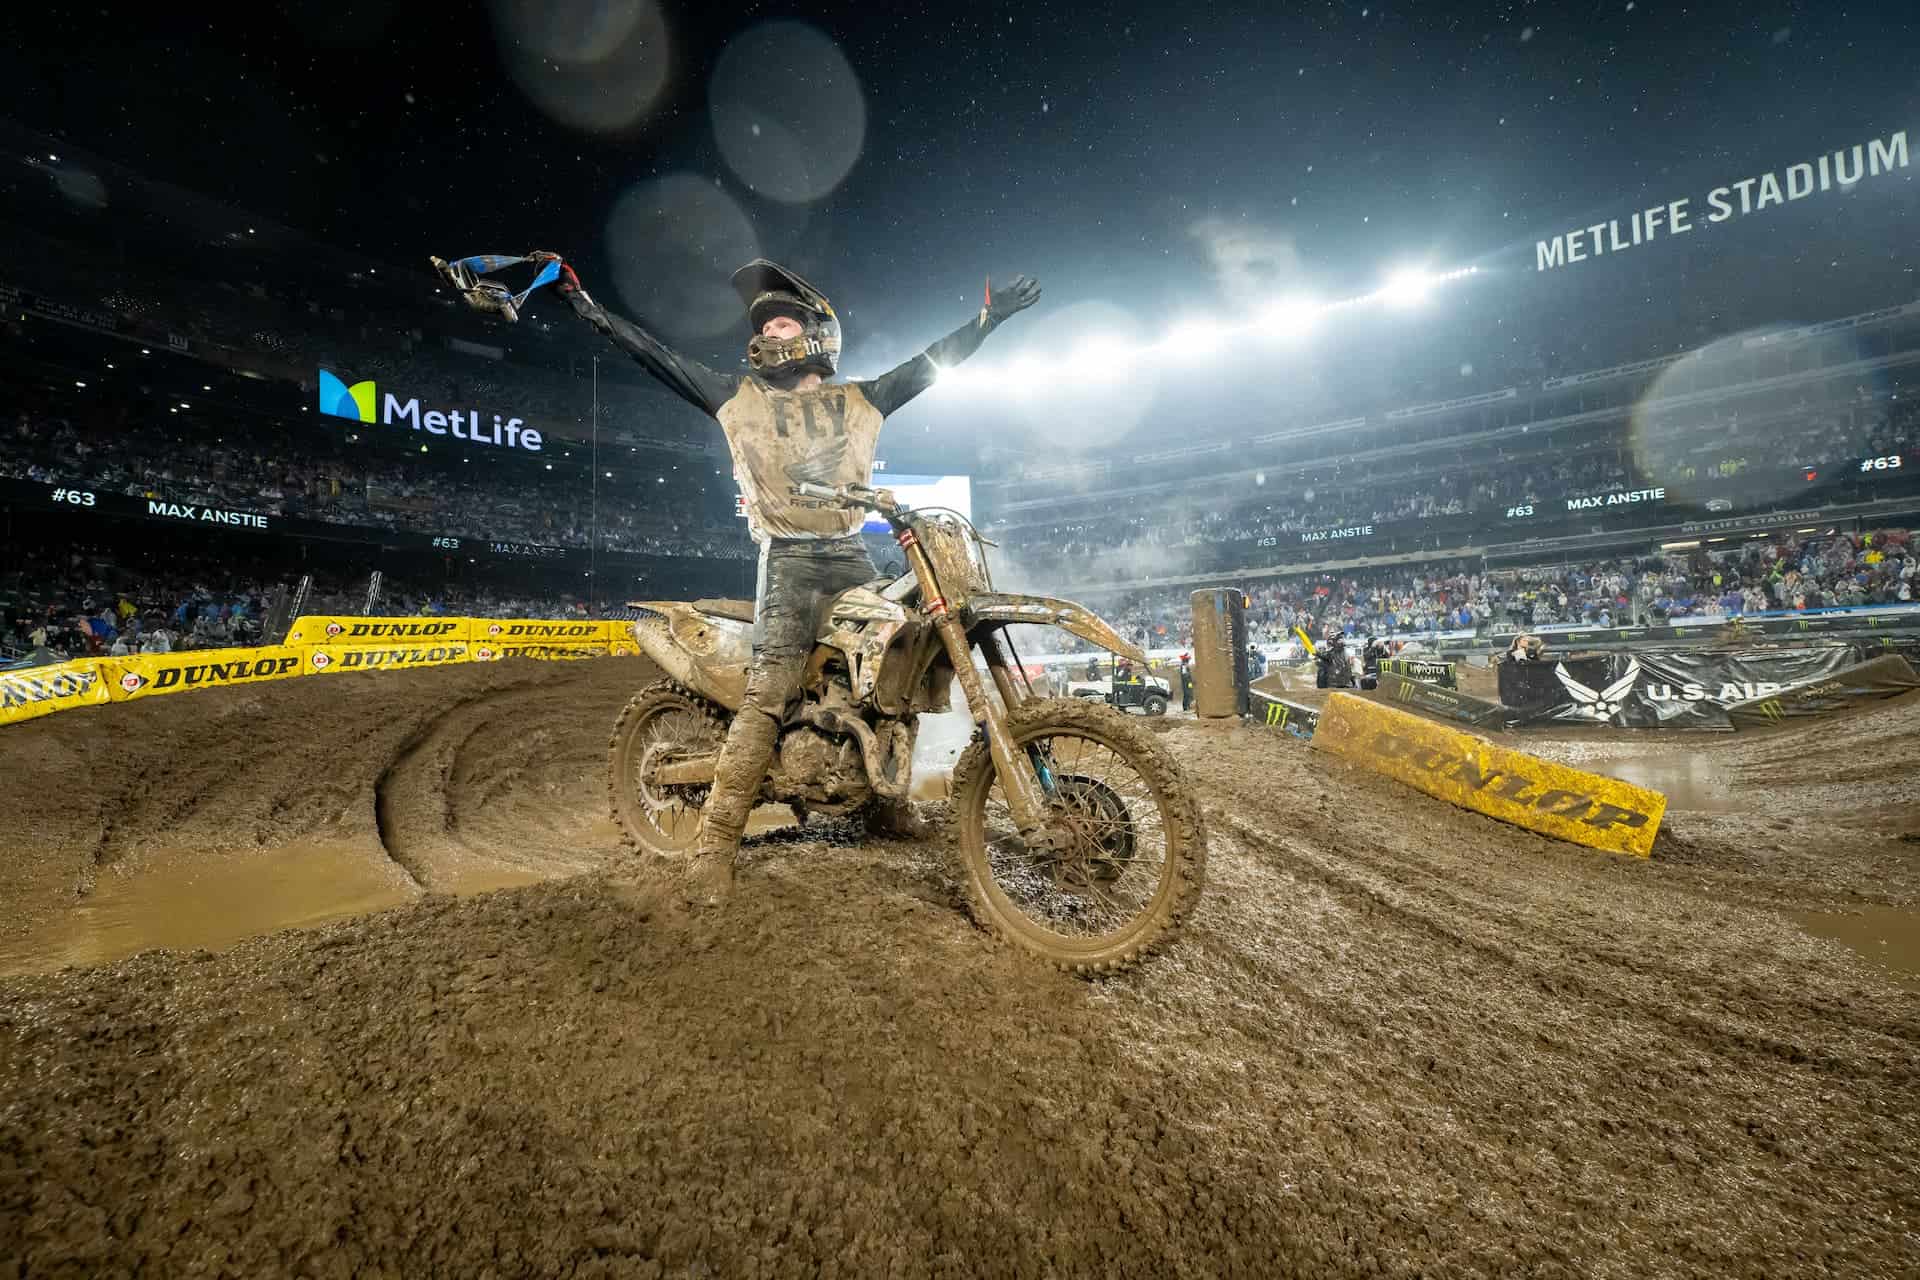 Max Anstie brought back his early-season speed and turned it into an exciting East/West Showdown win inside MetLife Stadium. Photo Credit: Feld Motor Sports, Inc.